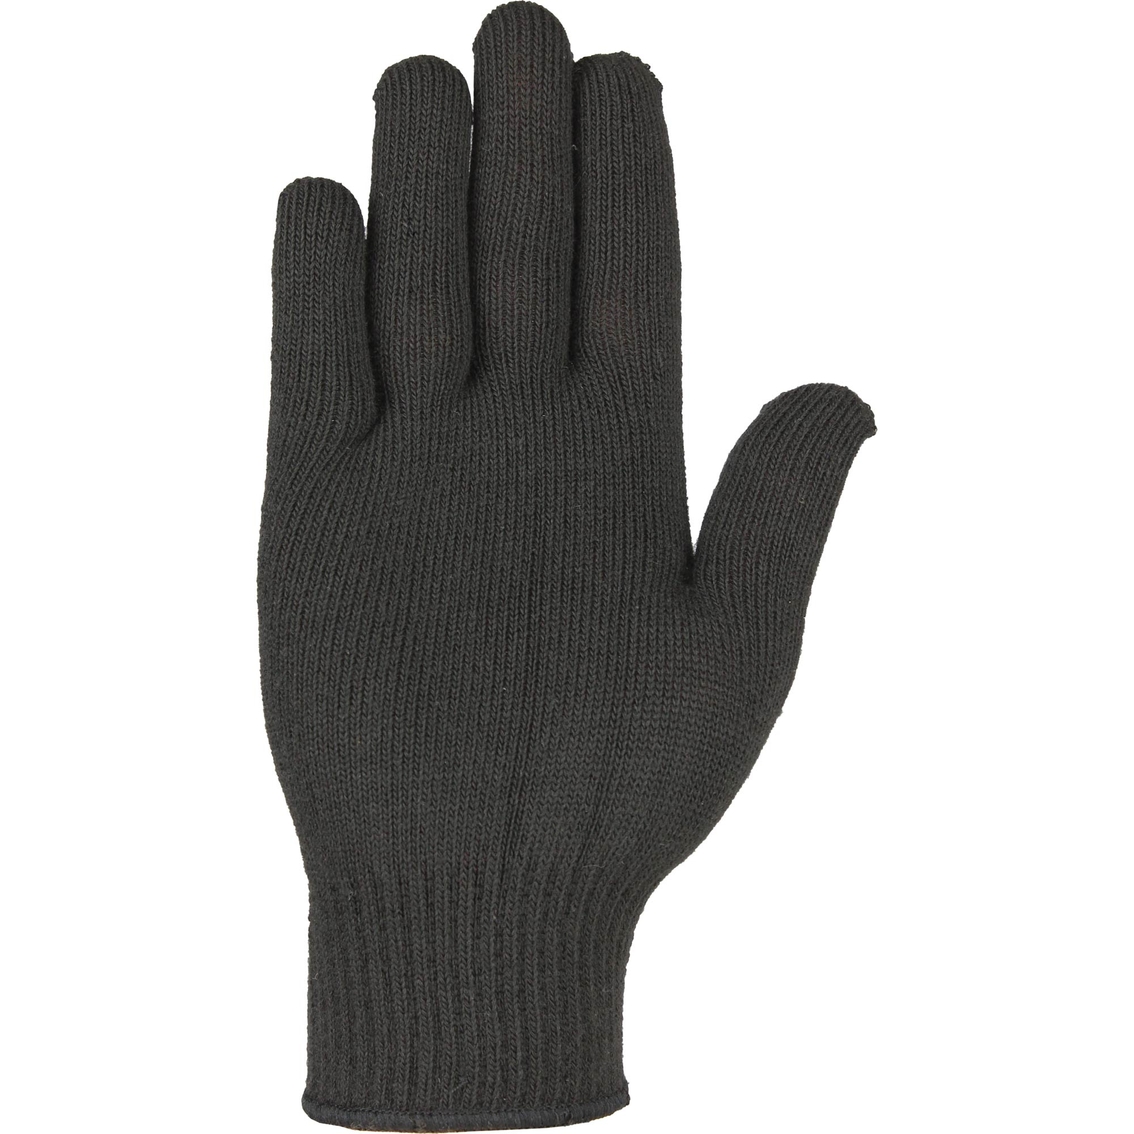 Seirus Innovation PolyPro Knit Glove Liner - Image 3 of 3